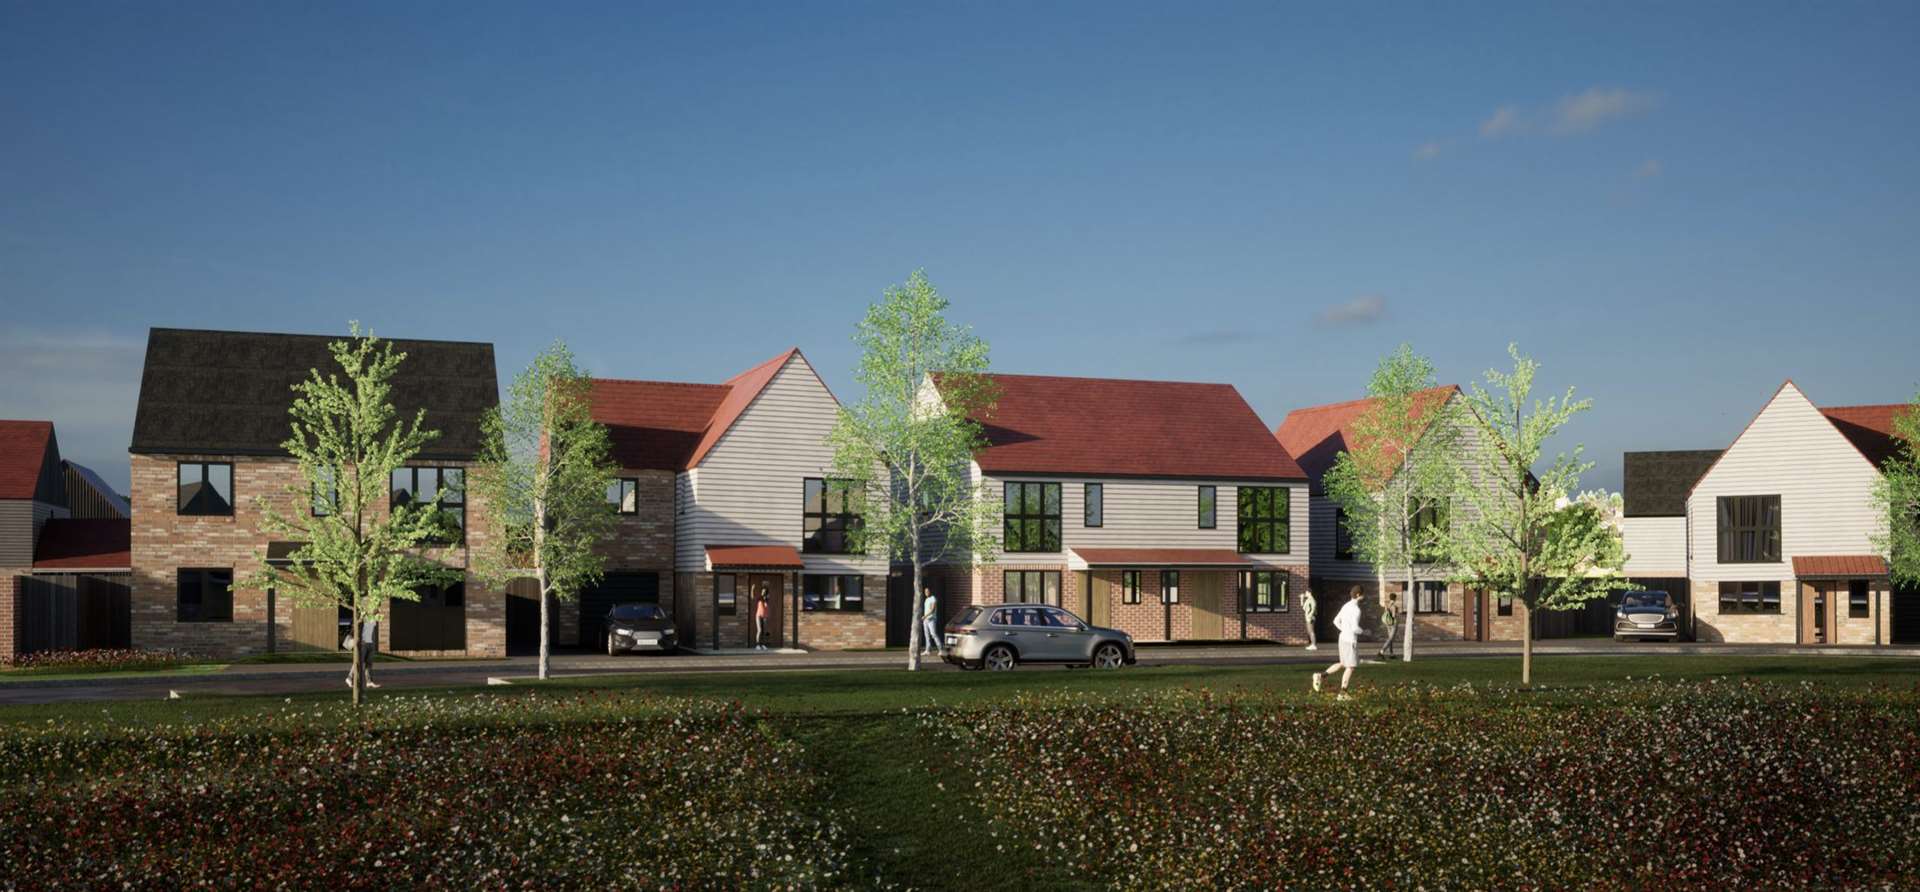 The estate near Herne Bay will feature 180 flats and houses. Picture: Kitewood